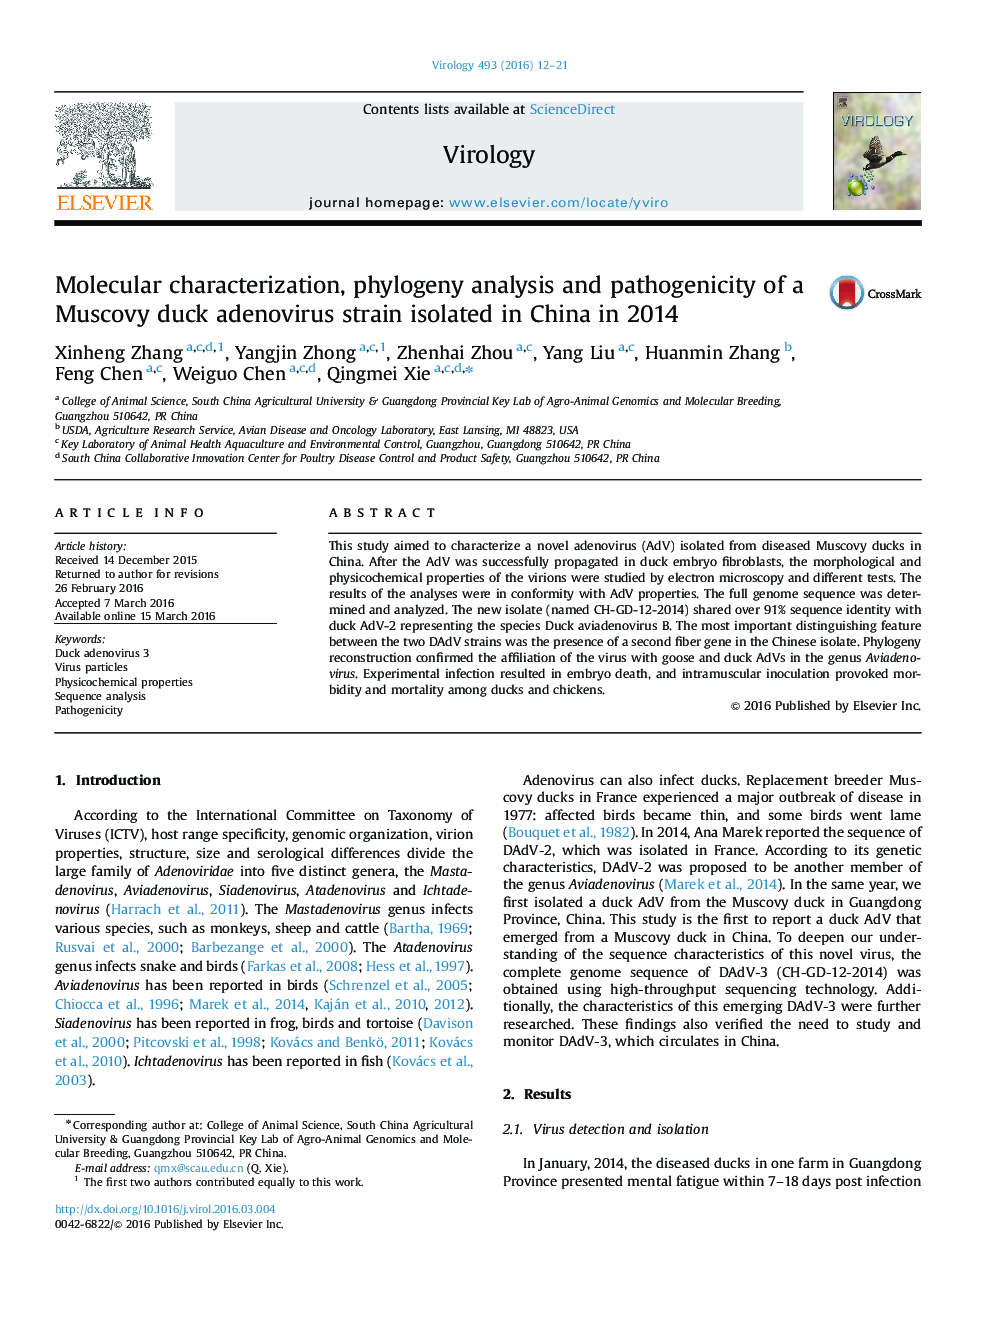 Molecular characterization, phylogeny analysis and pathogenicity of a Muscovy duck adenovirus strain isolated in China in 2014